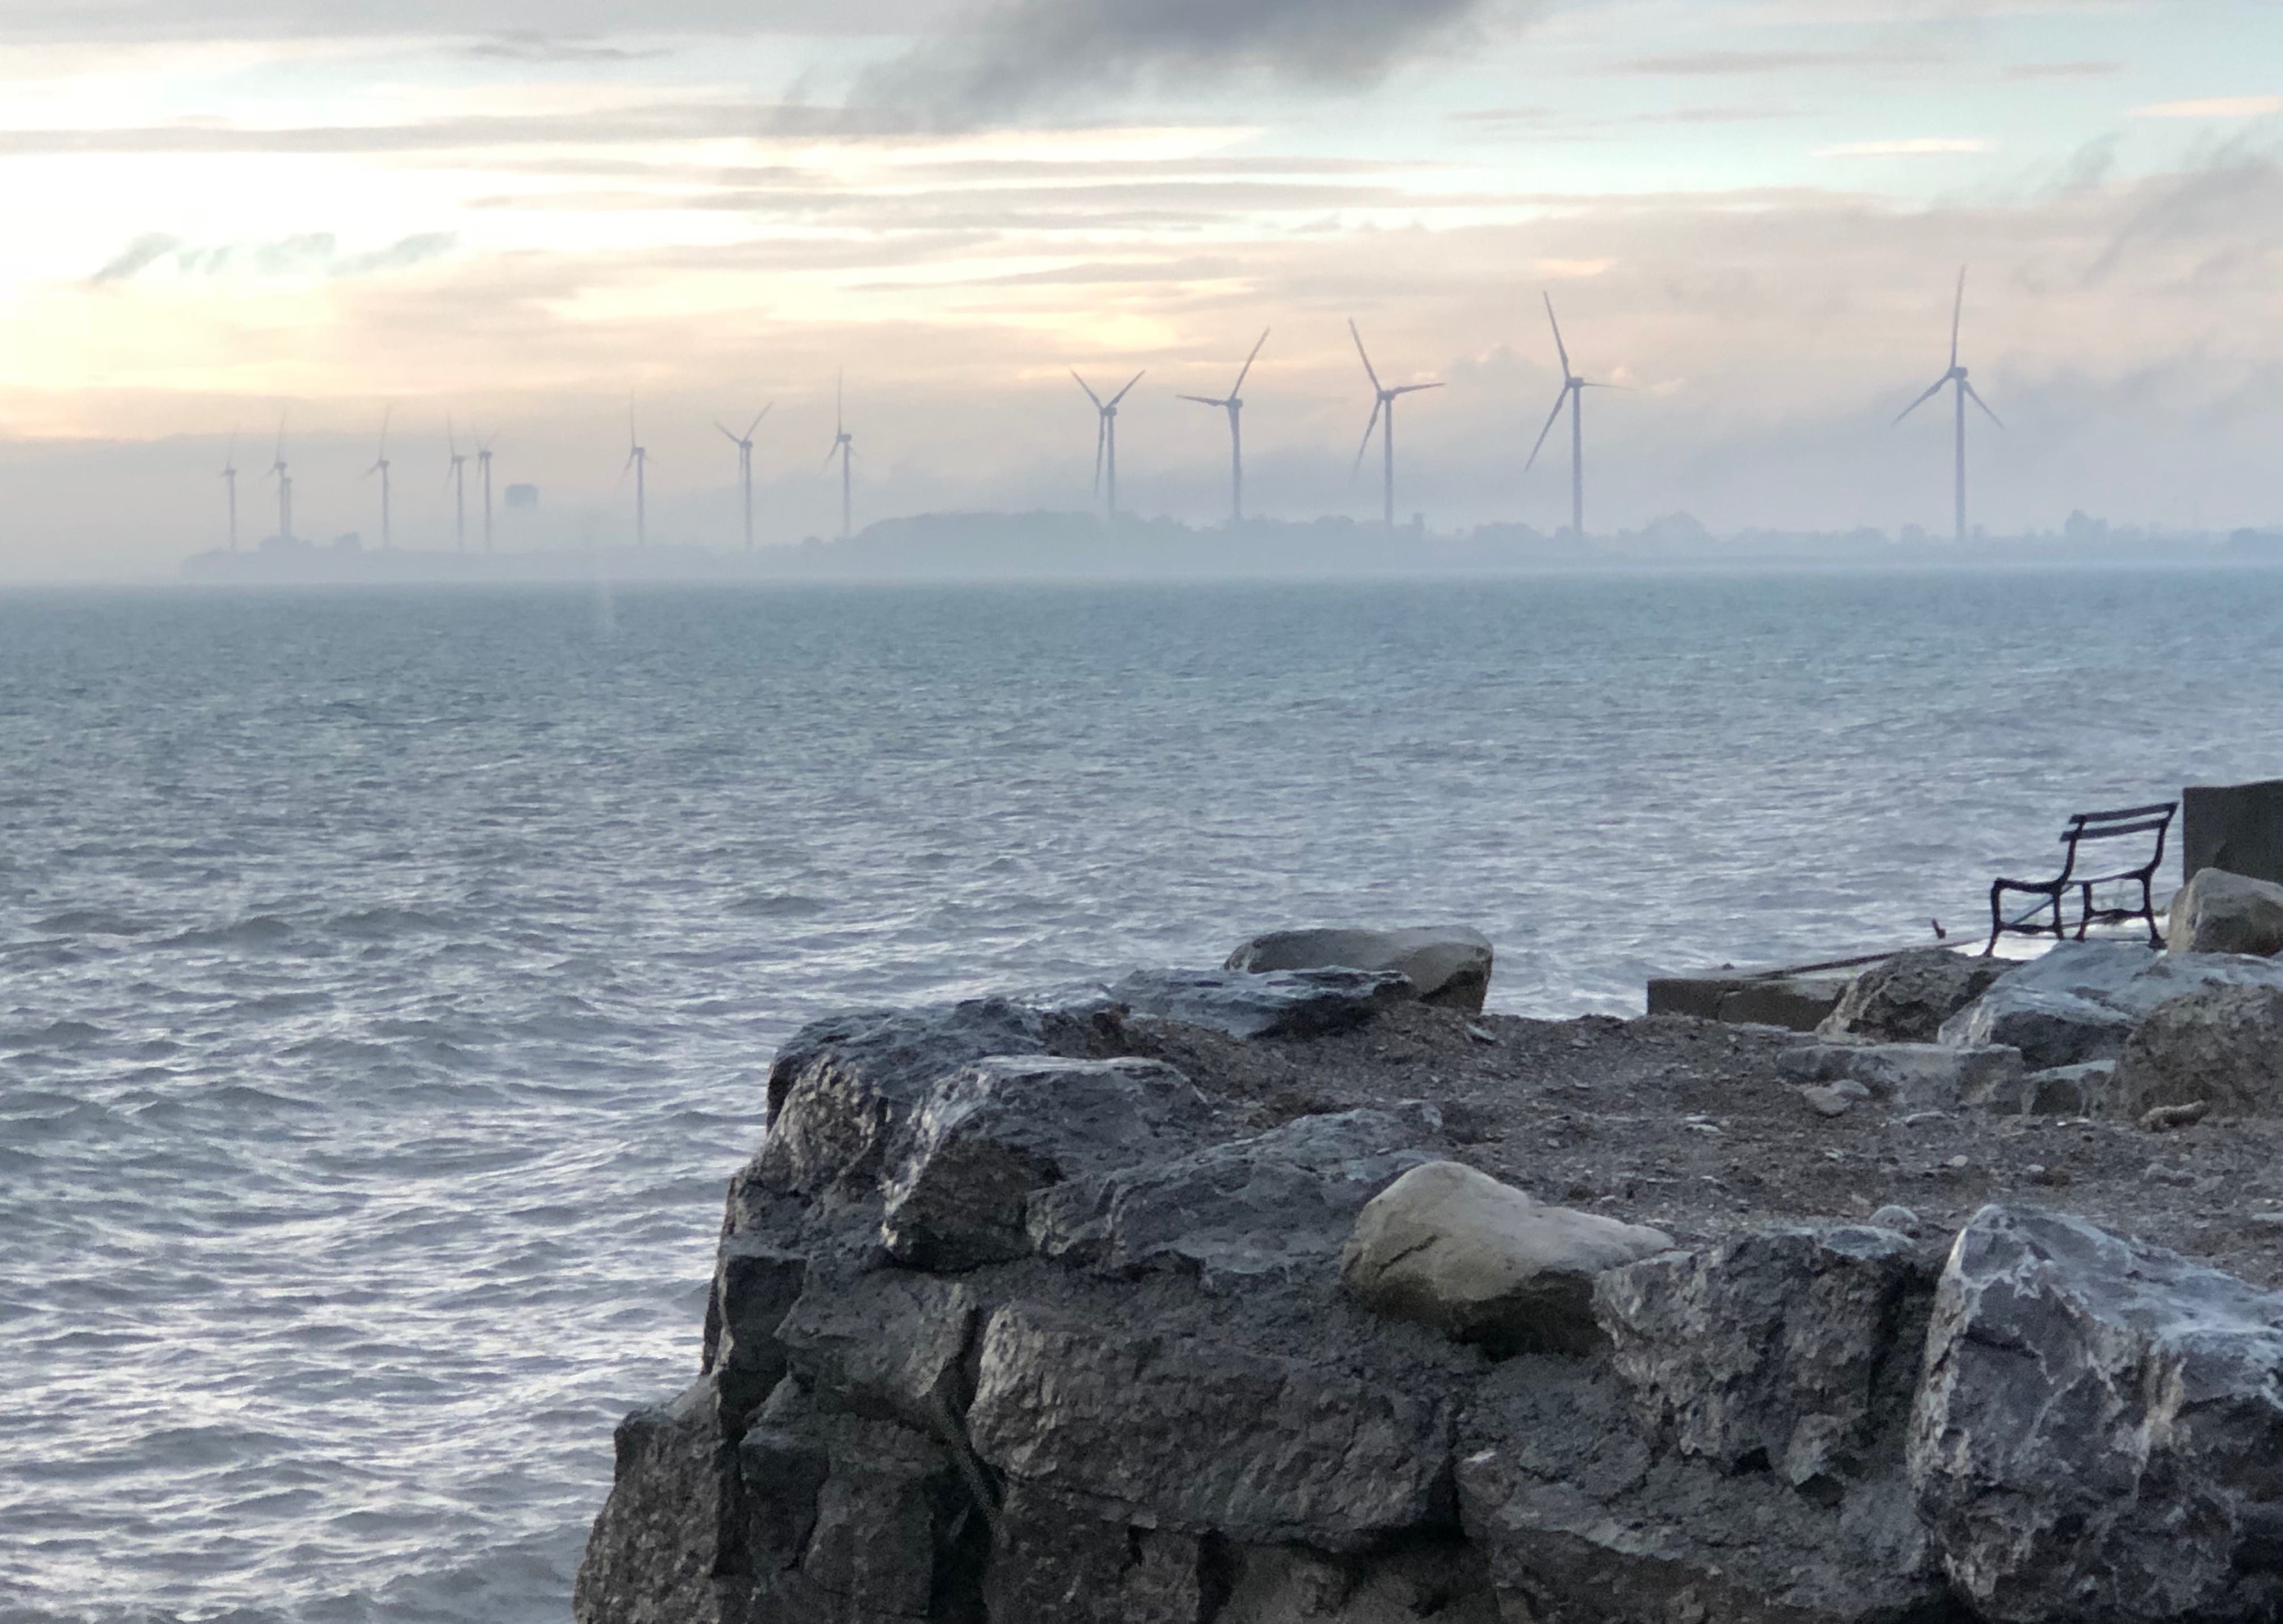 Multiple wind turbines can be seen over a body of water through the fog. A bench is on a stone wall in the foreground.